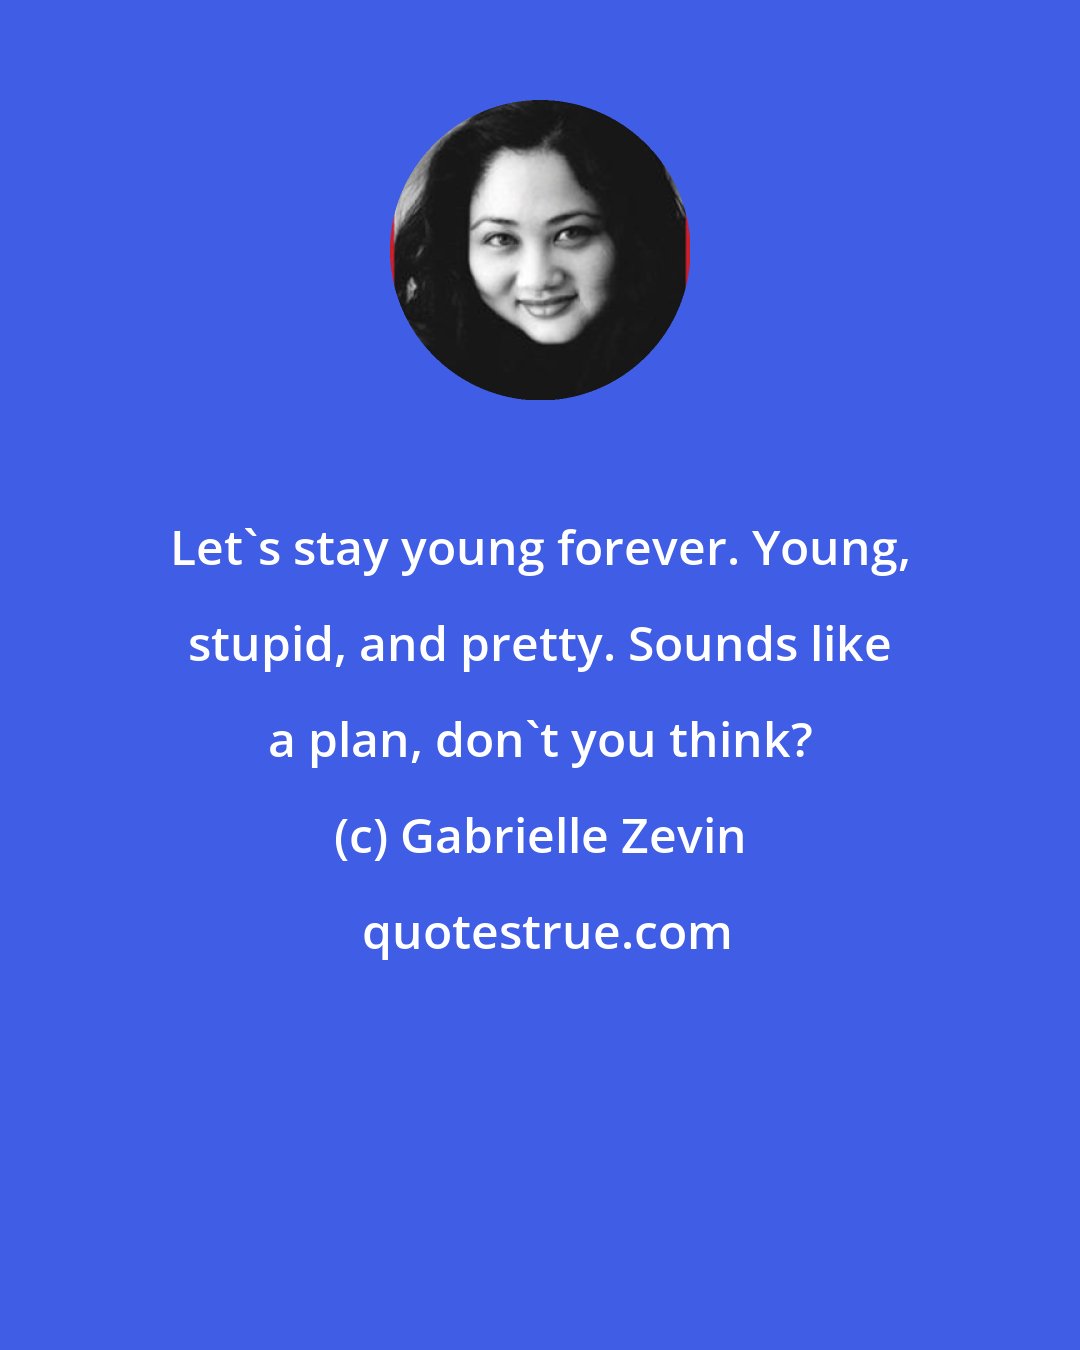 Gabrielle Zevin: Let's stay young forever. Young, stupid, and pretty. Sounds like a plan, don't you think?